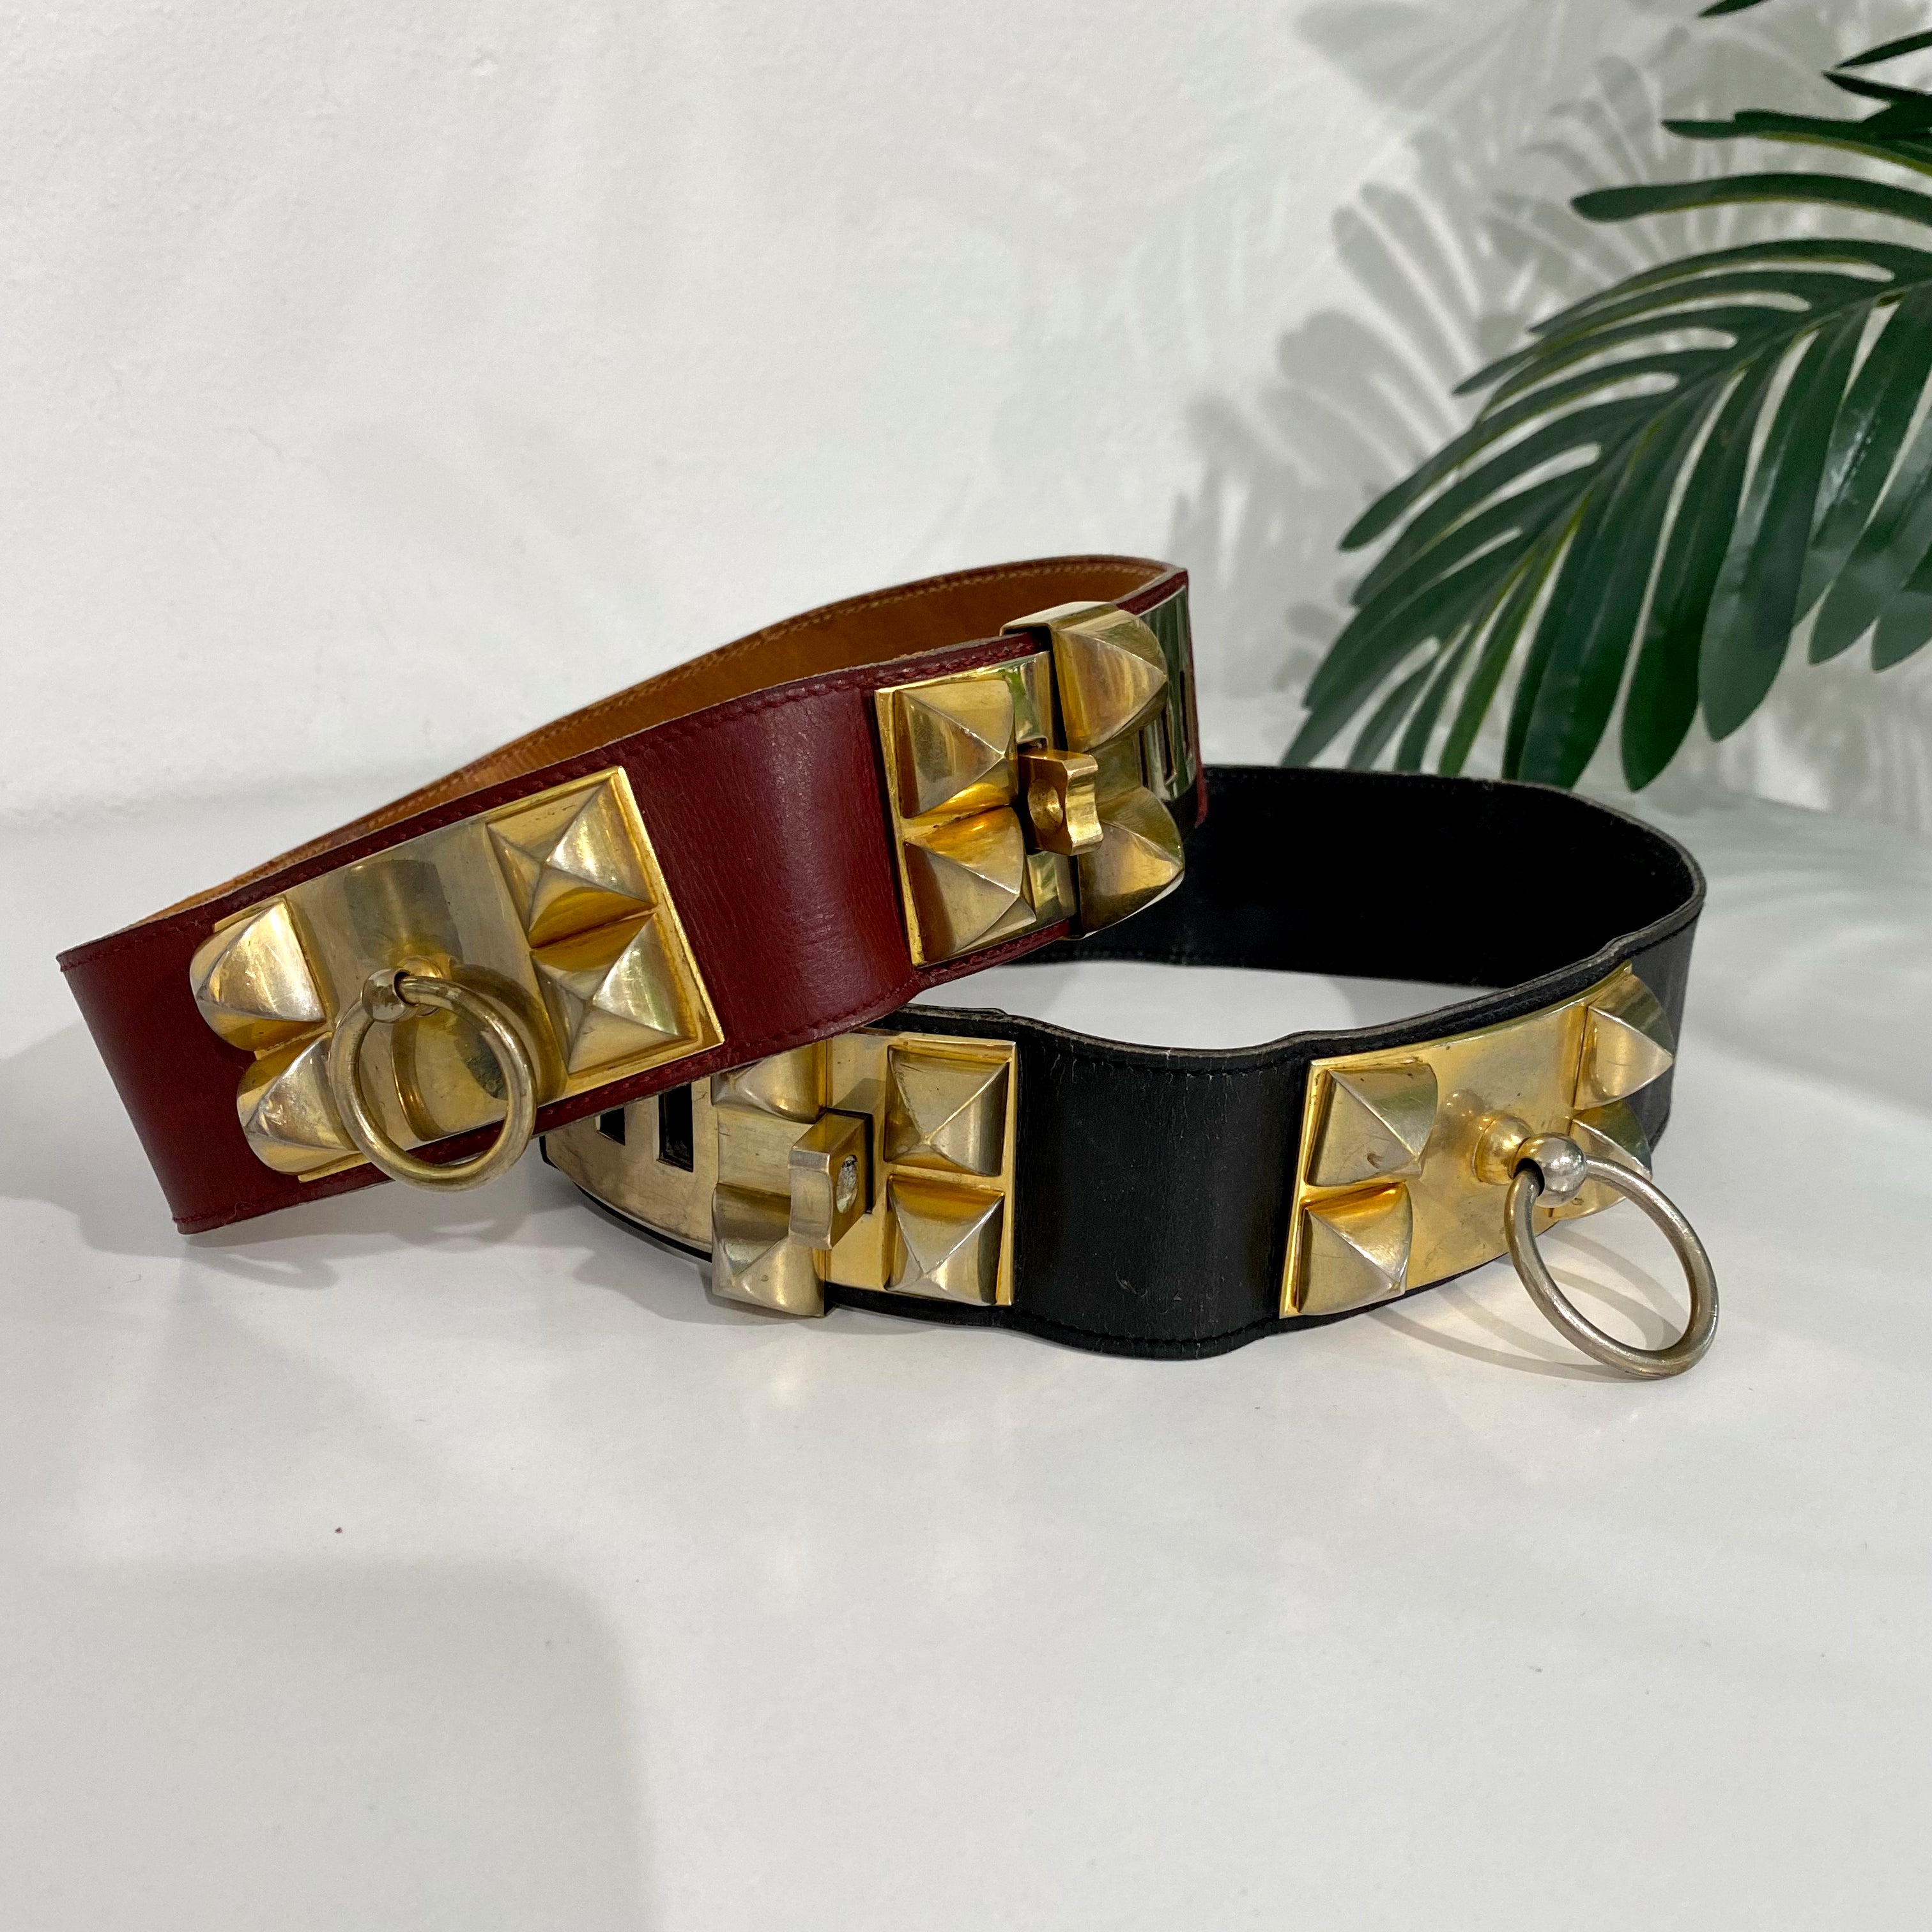 Vintage RARE Hermes Belt Burgundy With Lug Nuts And Studs - Collector Piece